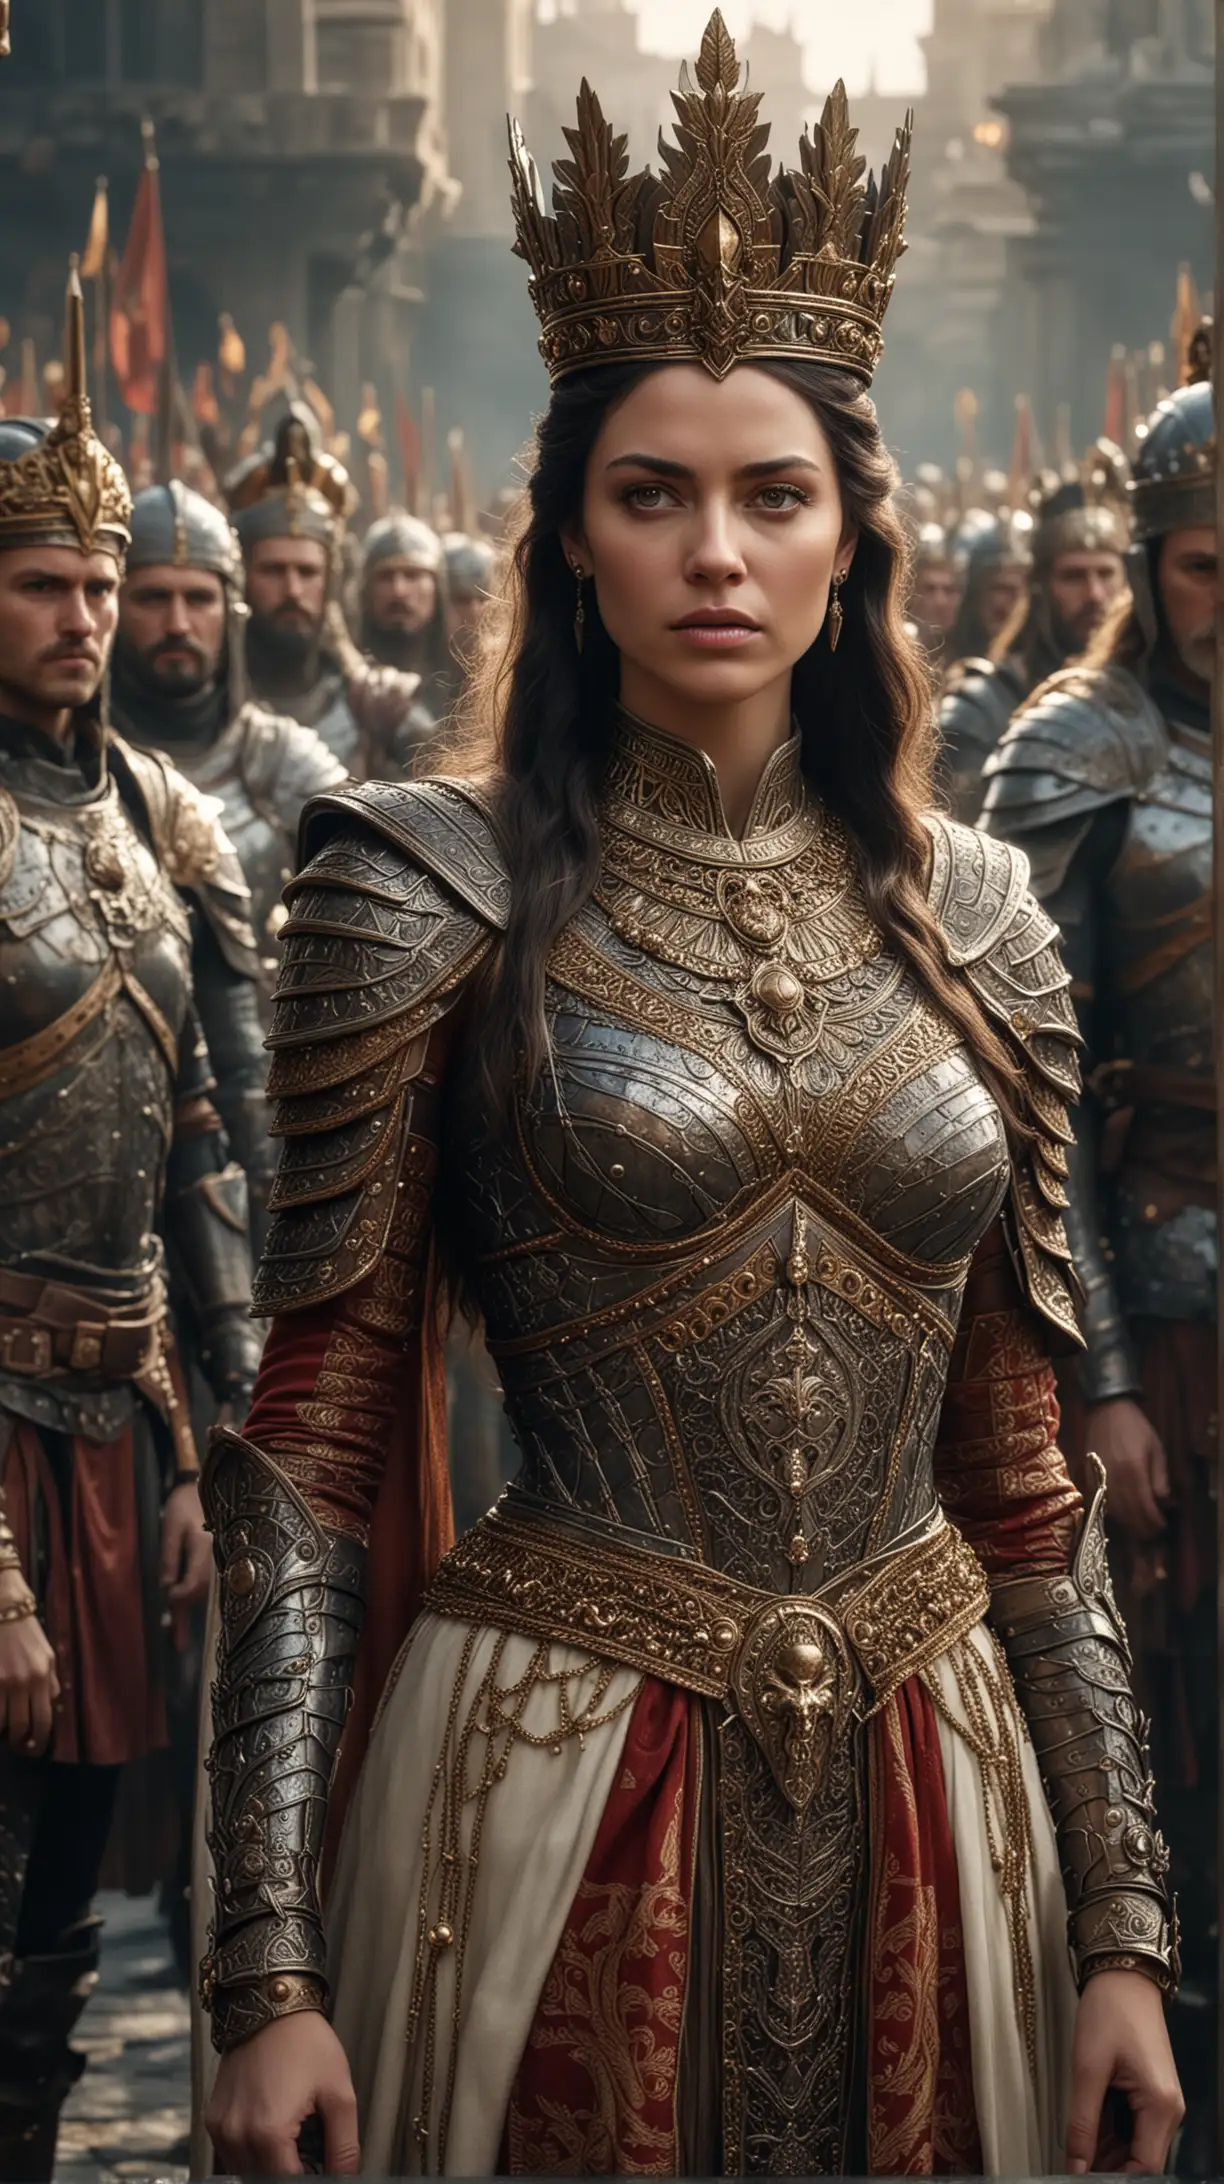 Queen Tomyris Leading Fearlessly in Ornate Armor and Crown